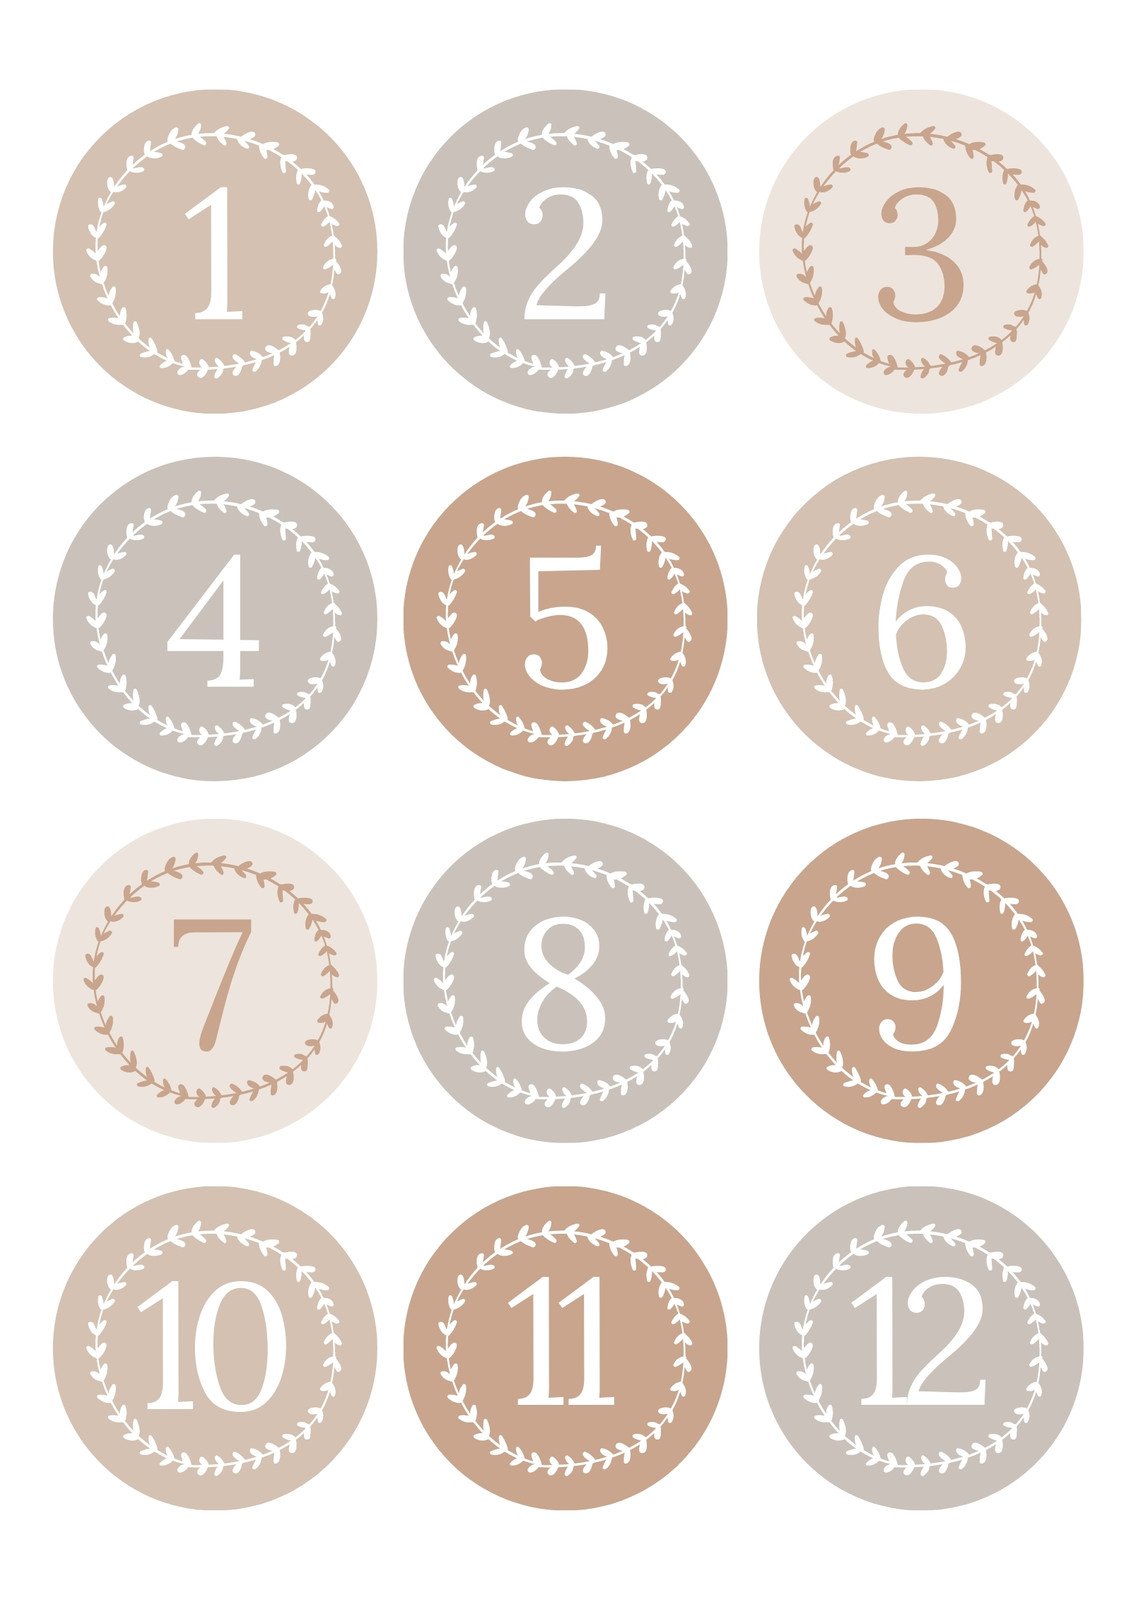 Shirt Number designs, themes, templates and downloadable graphic